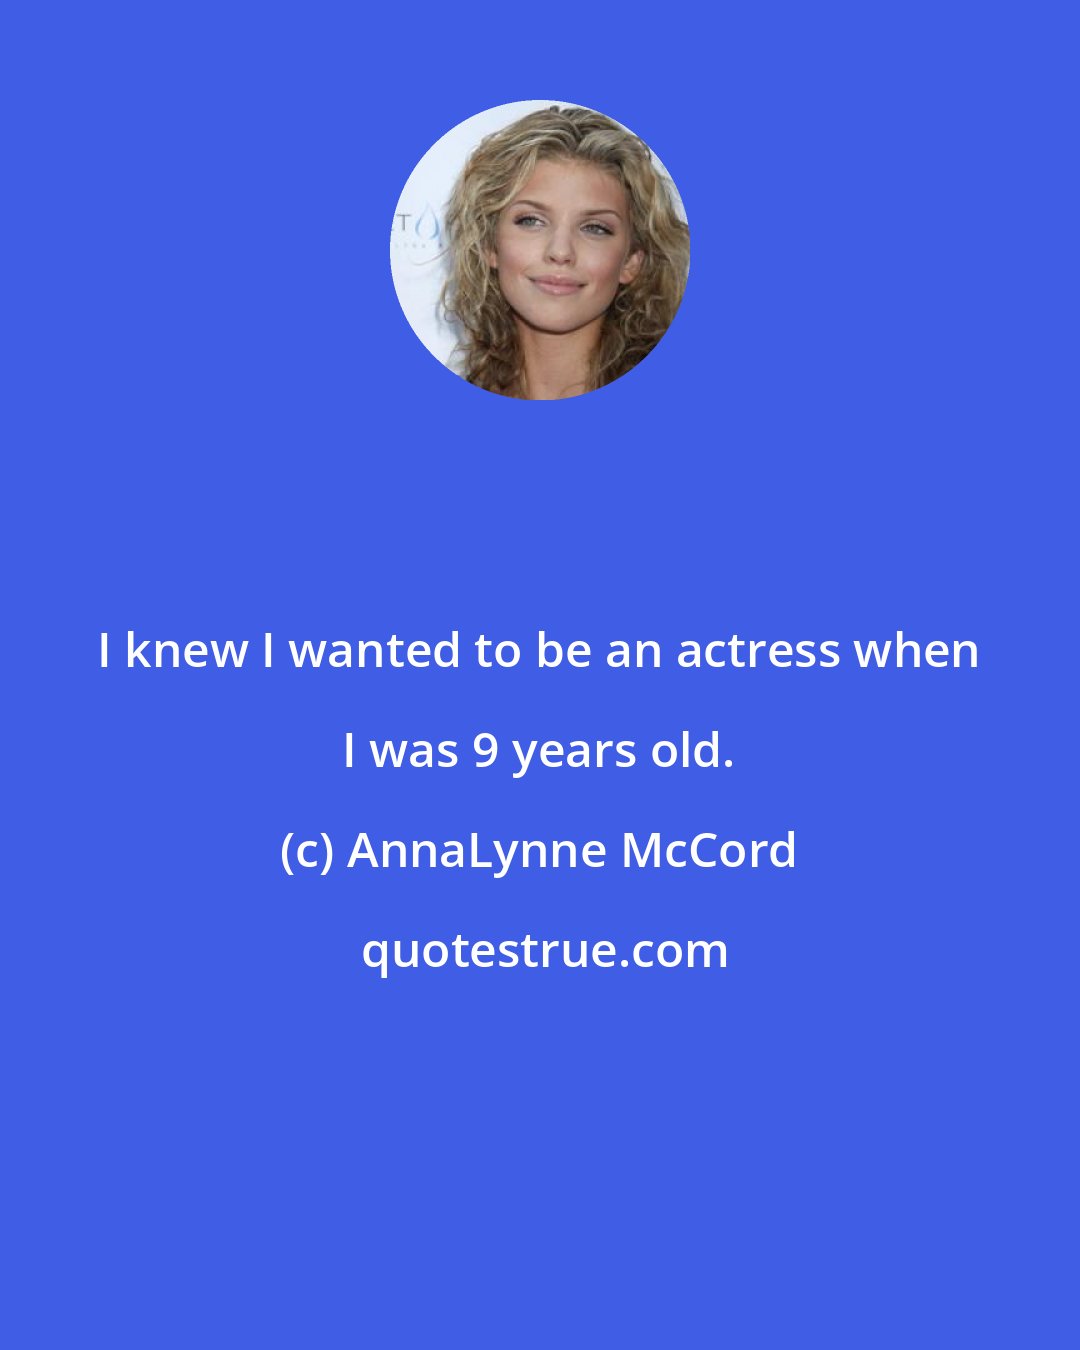 AnnaLynne McCord: I knew I wanted to be an actress when I was 9 years old.